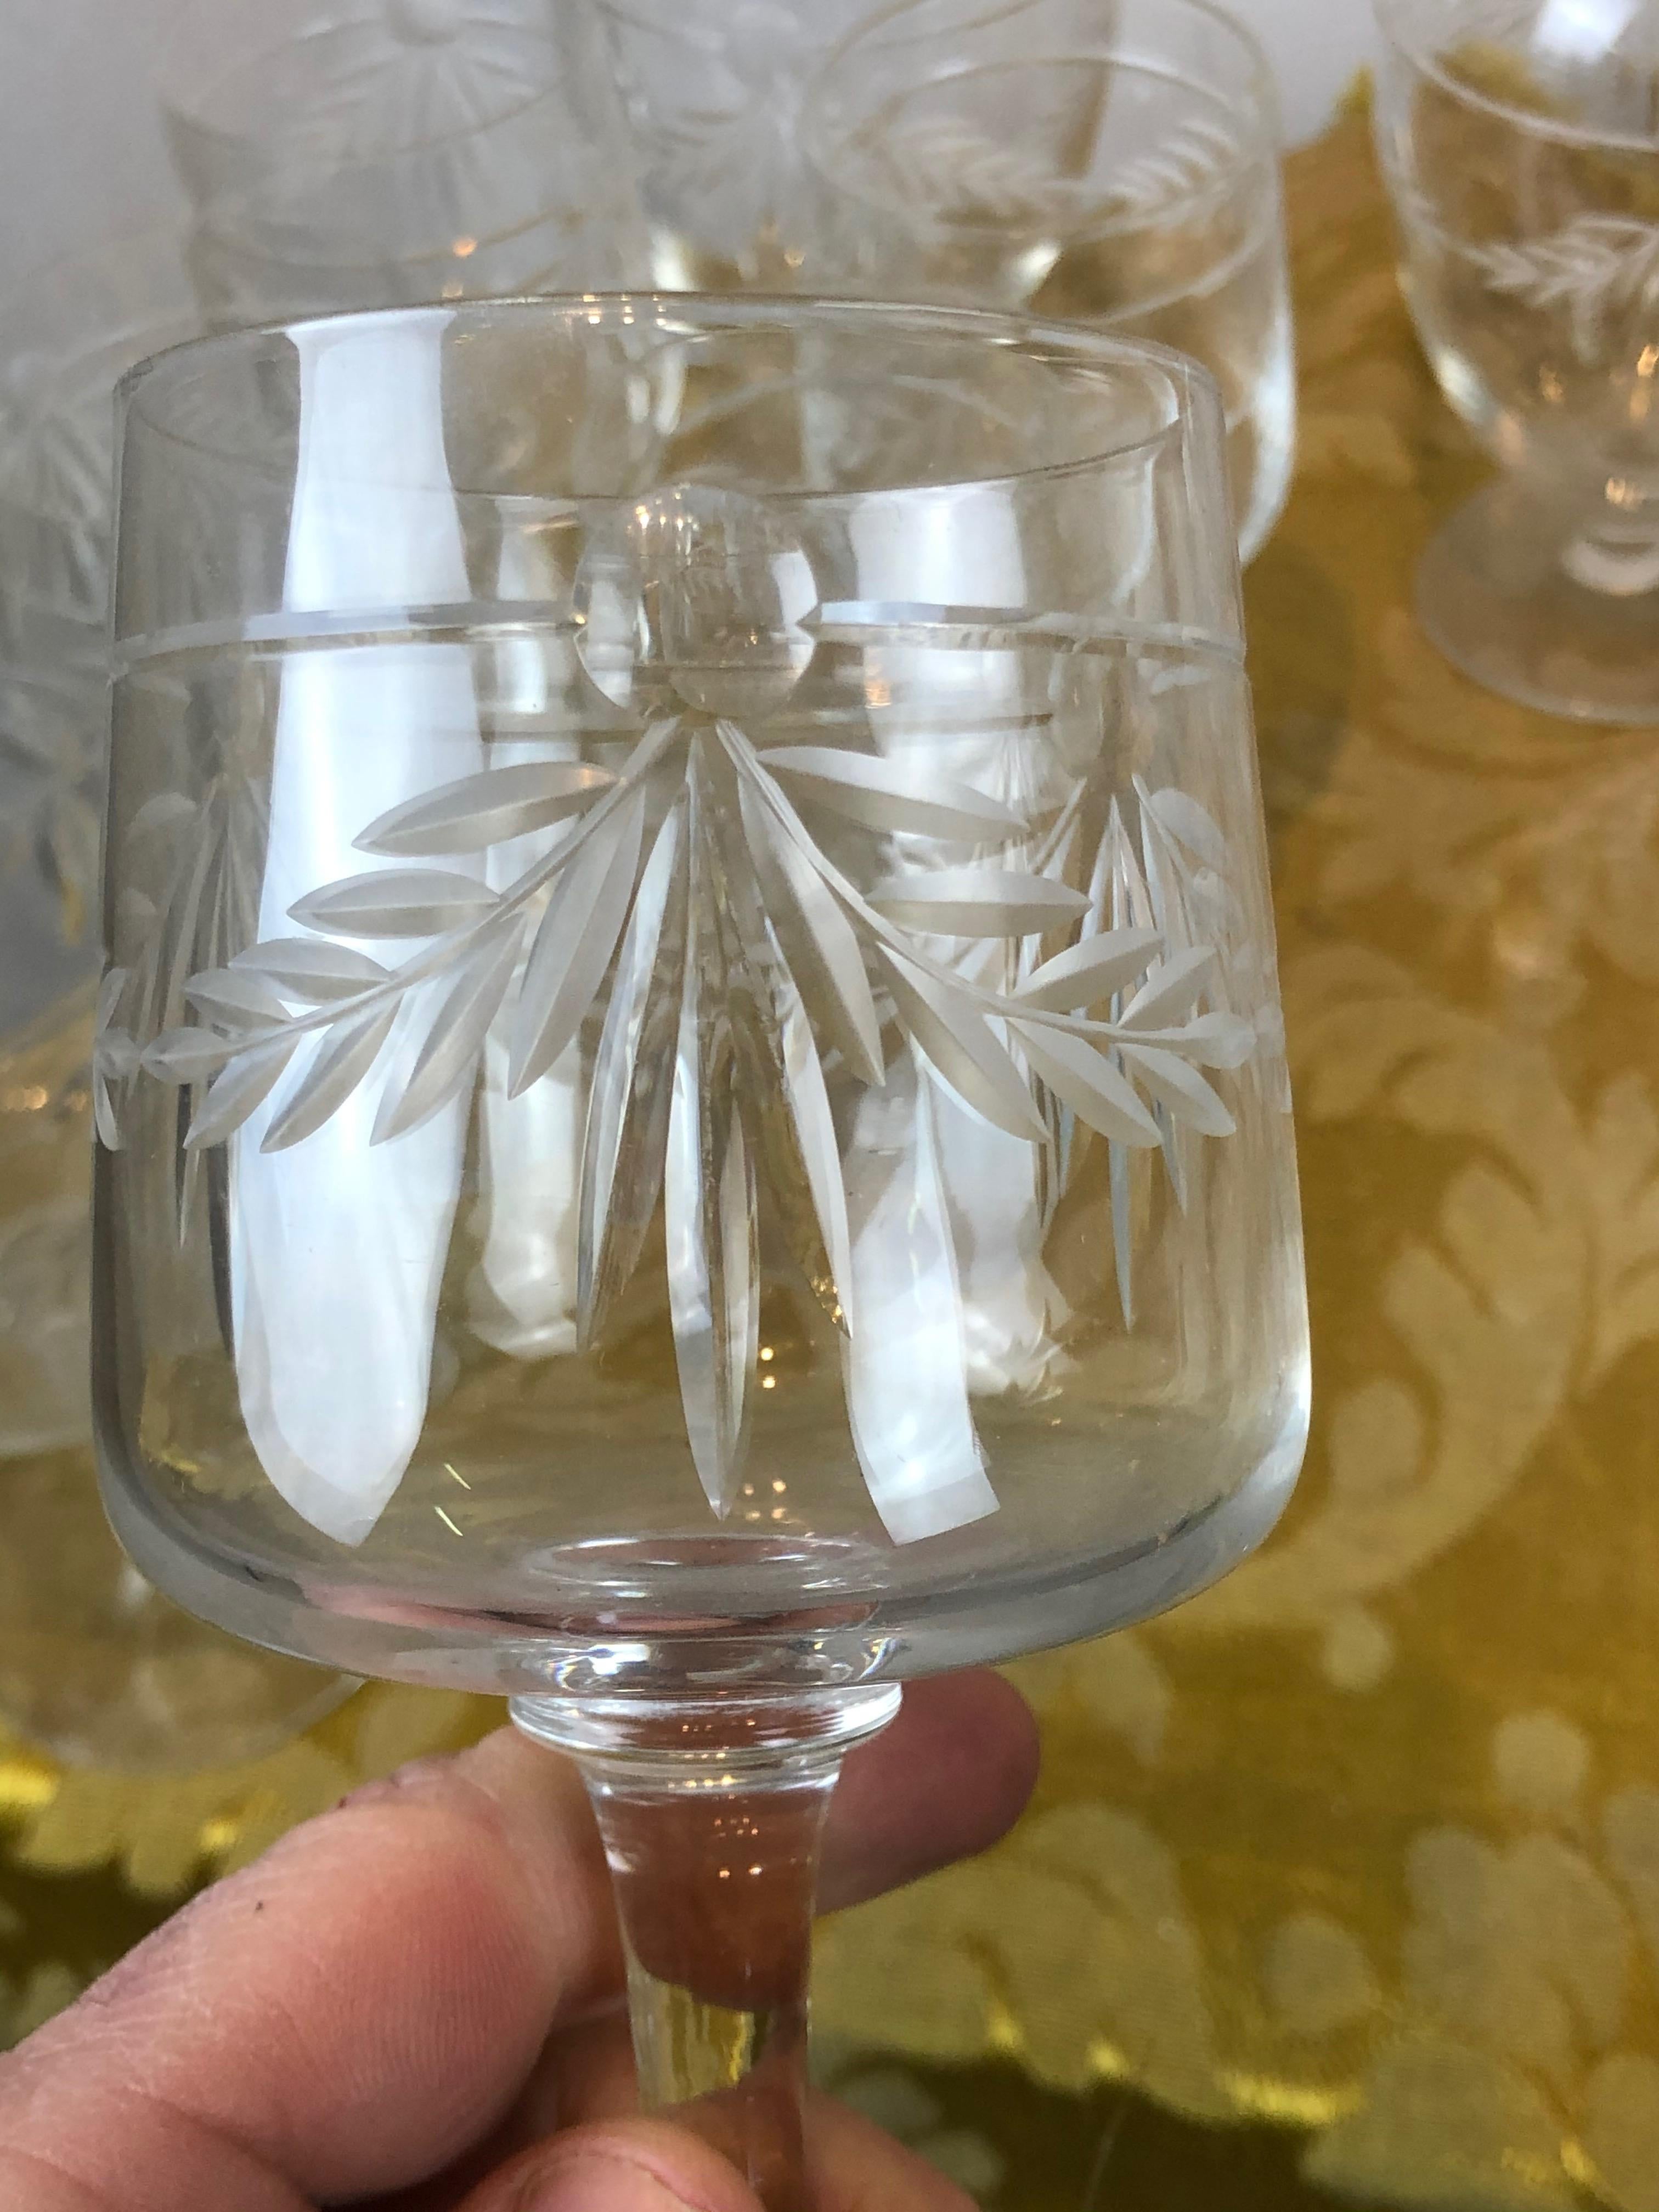 Wonderful Baccarat crystal service from the early 1900s.